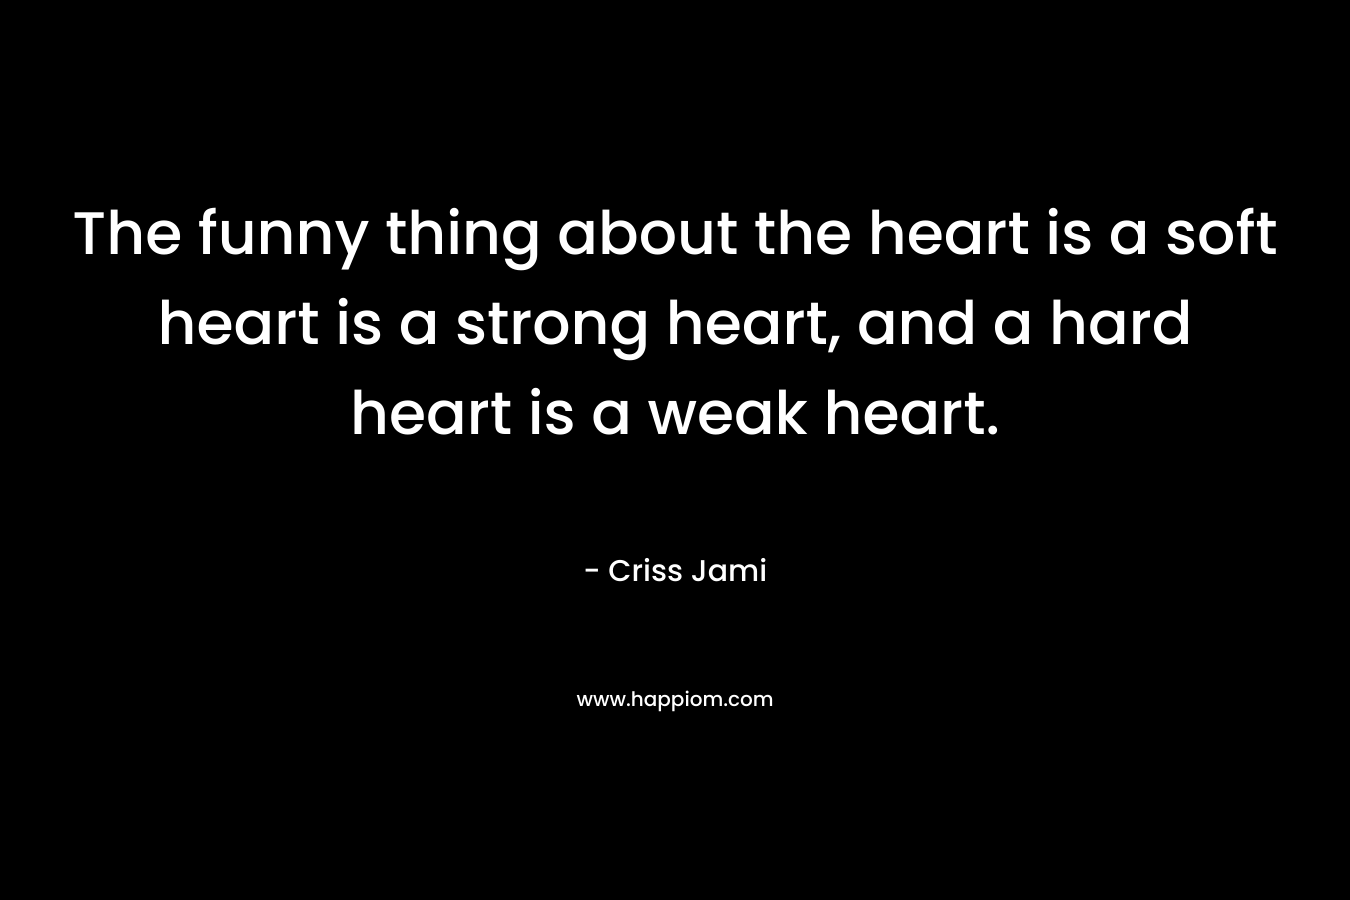 The funny thing about the heart is a soft heart is a strong heart, and a hard heart is a weak heart.